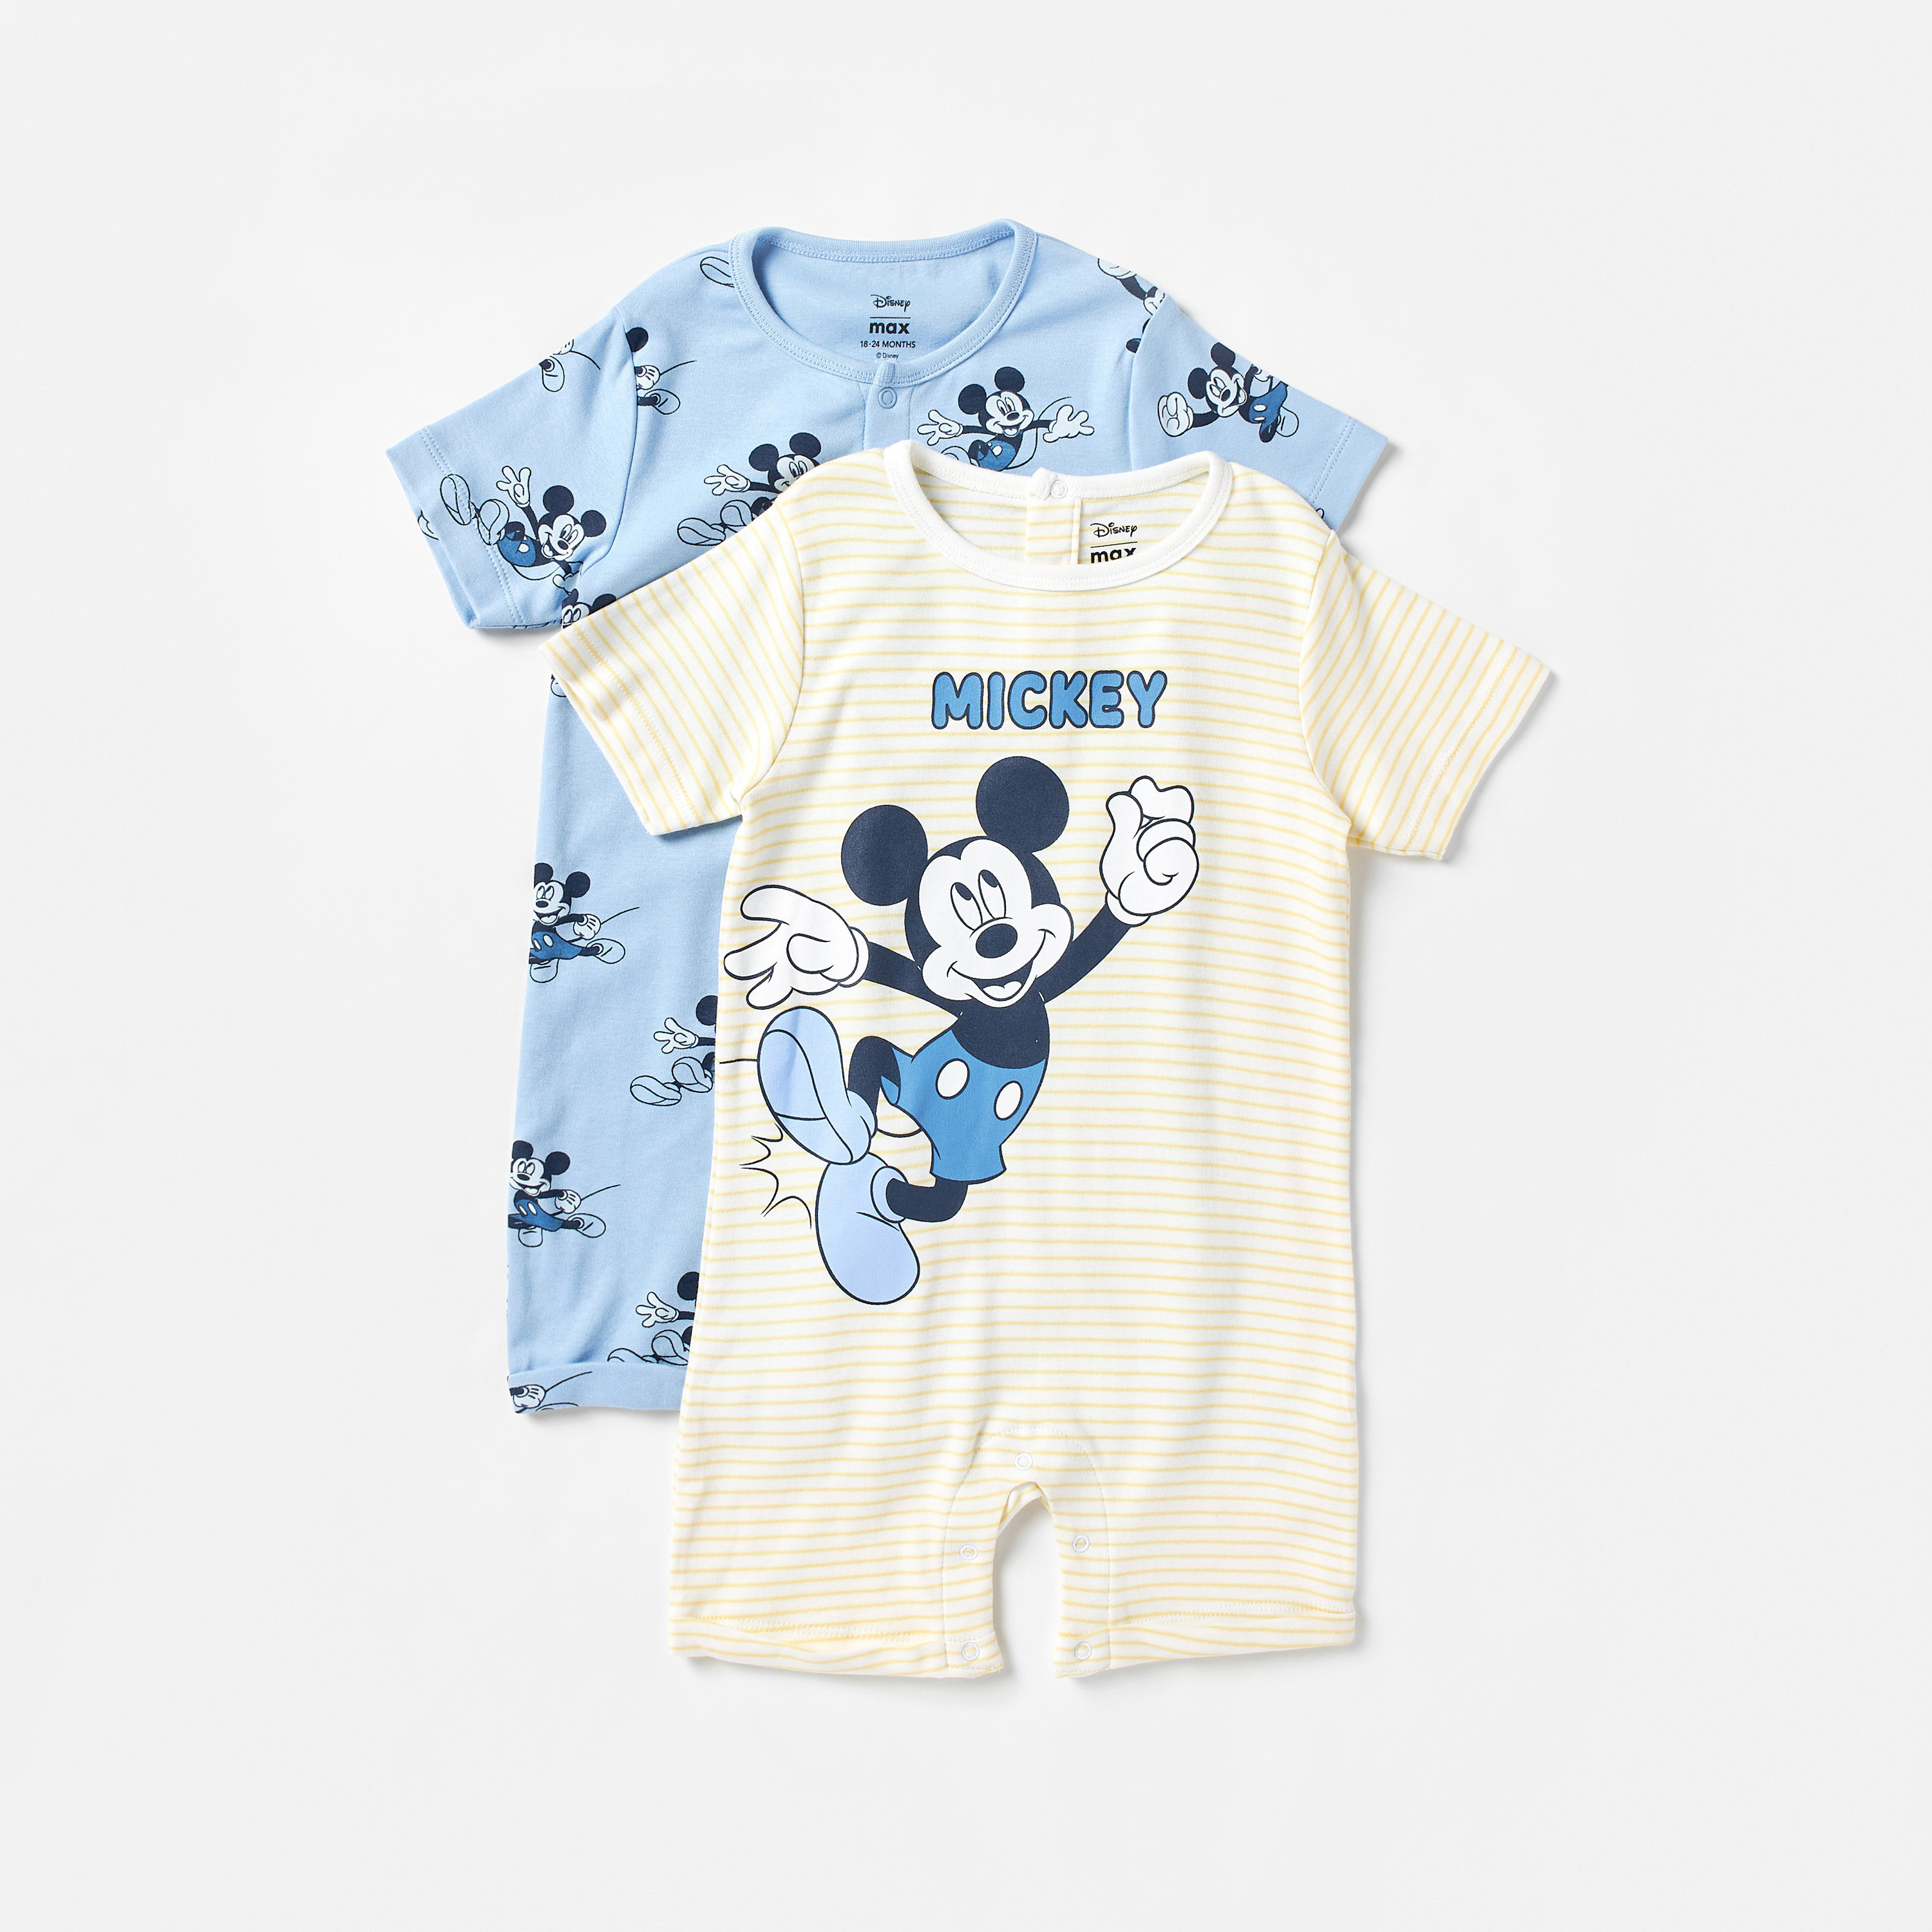 Mickey Mouse Vintage Jumpsuit Mickey Mouse nice designer | Grailed